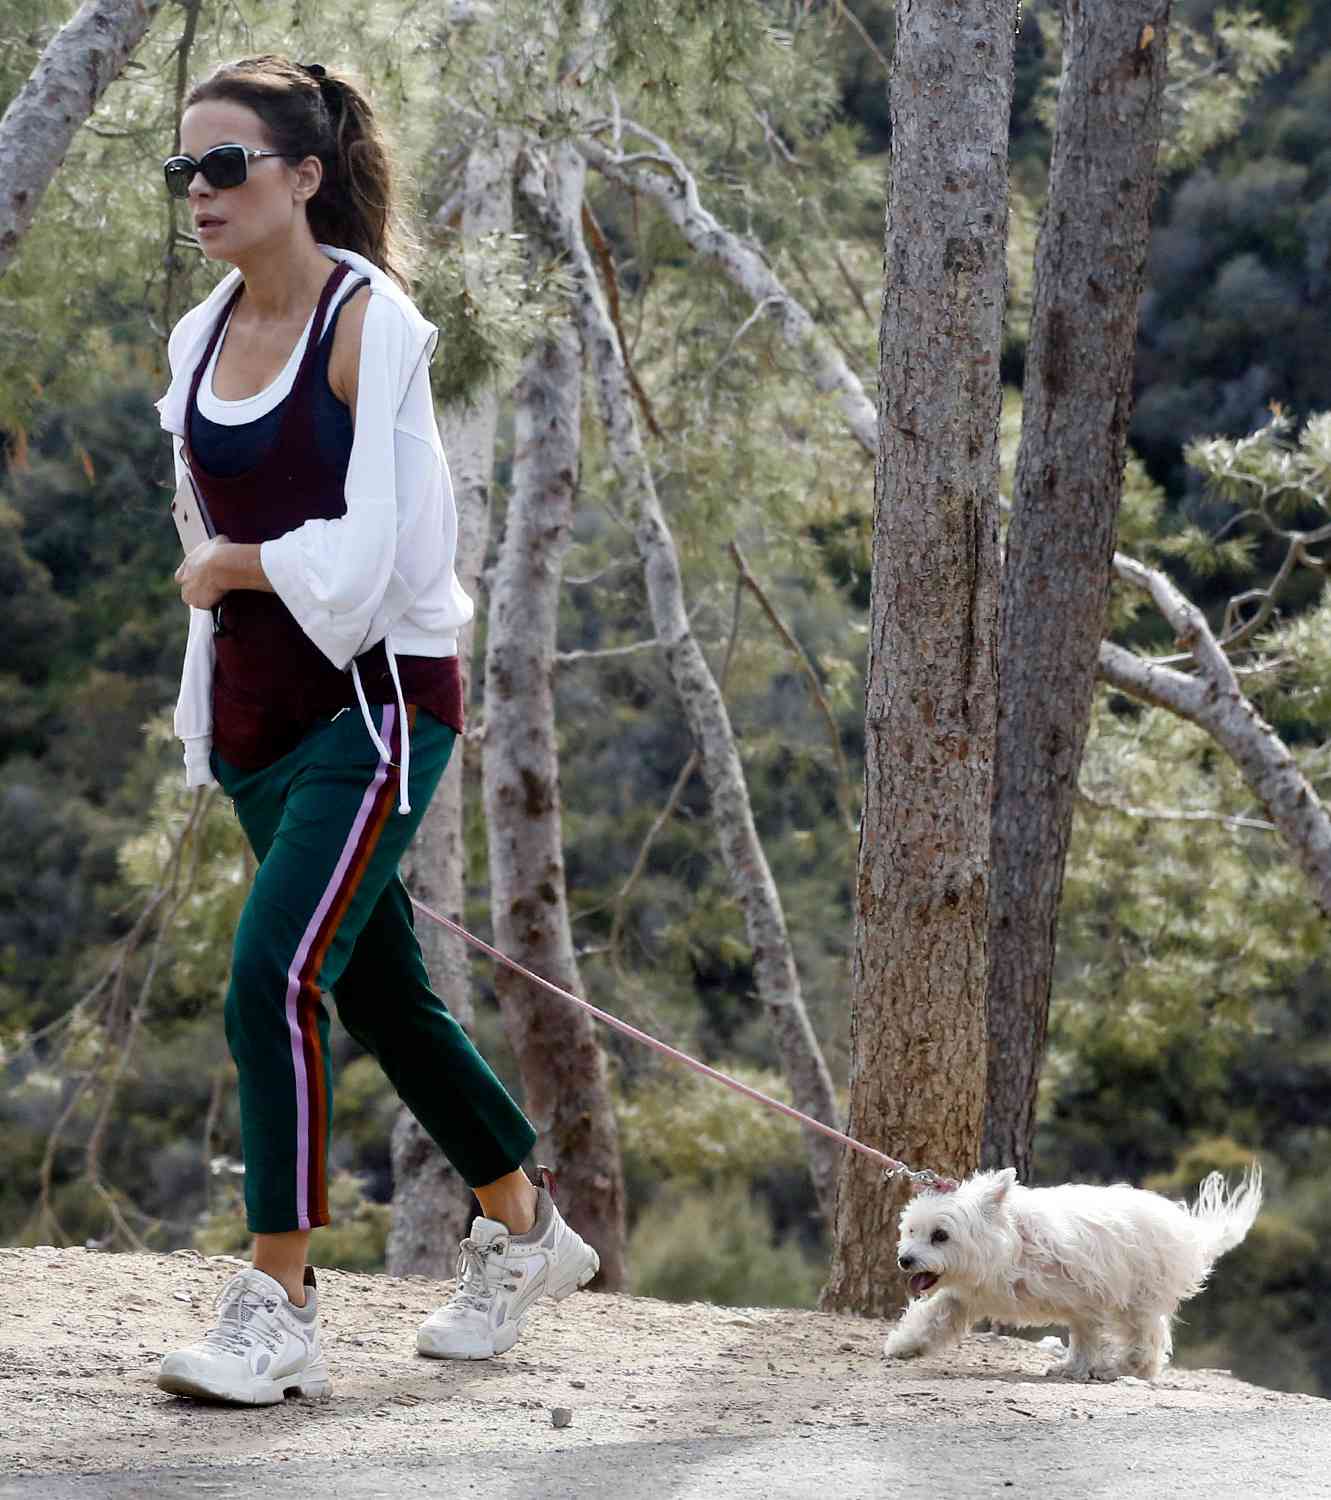 Kate Beckinsale takes her dog for a walk with male friend amid corona virus lockdown in Los Angeles